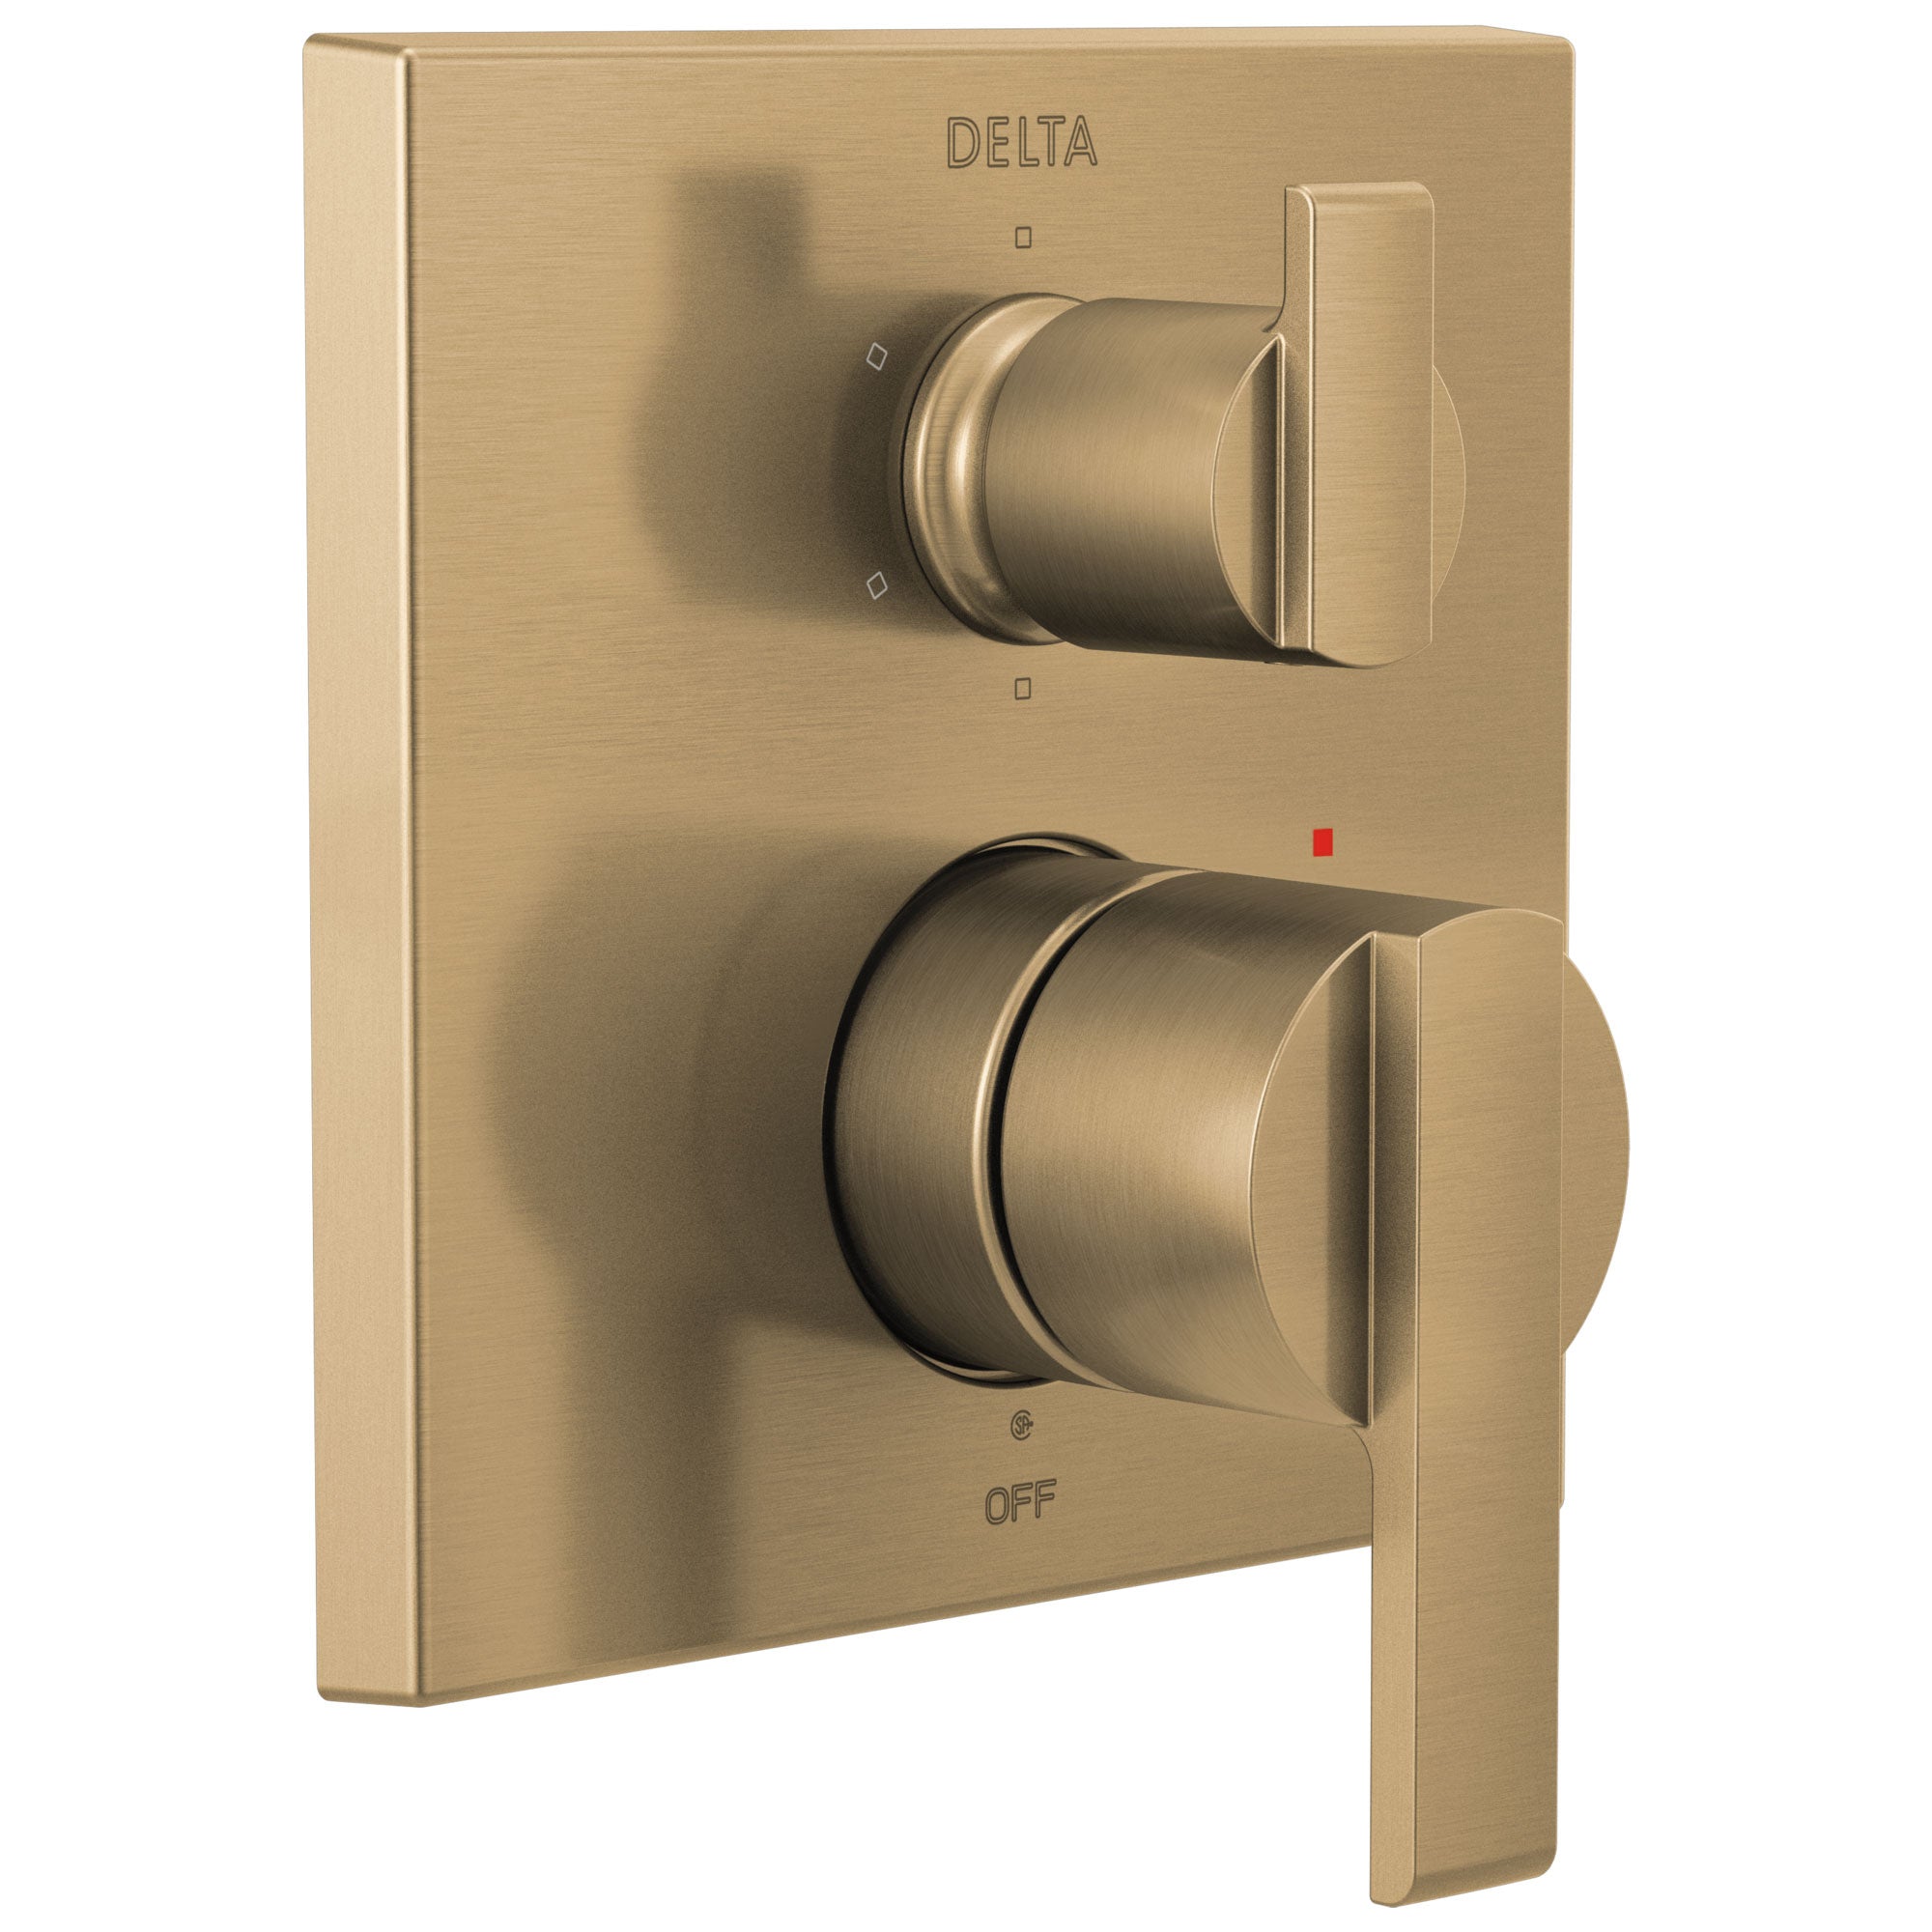 Delta Ara Champagne Bronze Finish Angular Modern Monitor 14 Series Shower Control Trim Kit with 6-Setting Integrated Diverter (Requires Valve) DT24967CZ